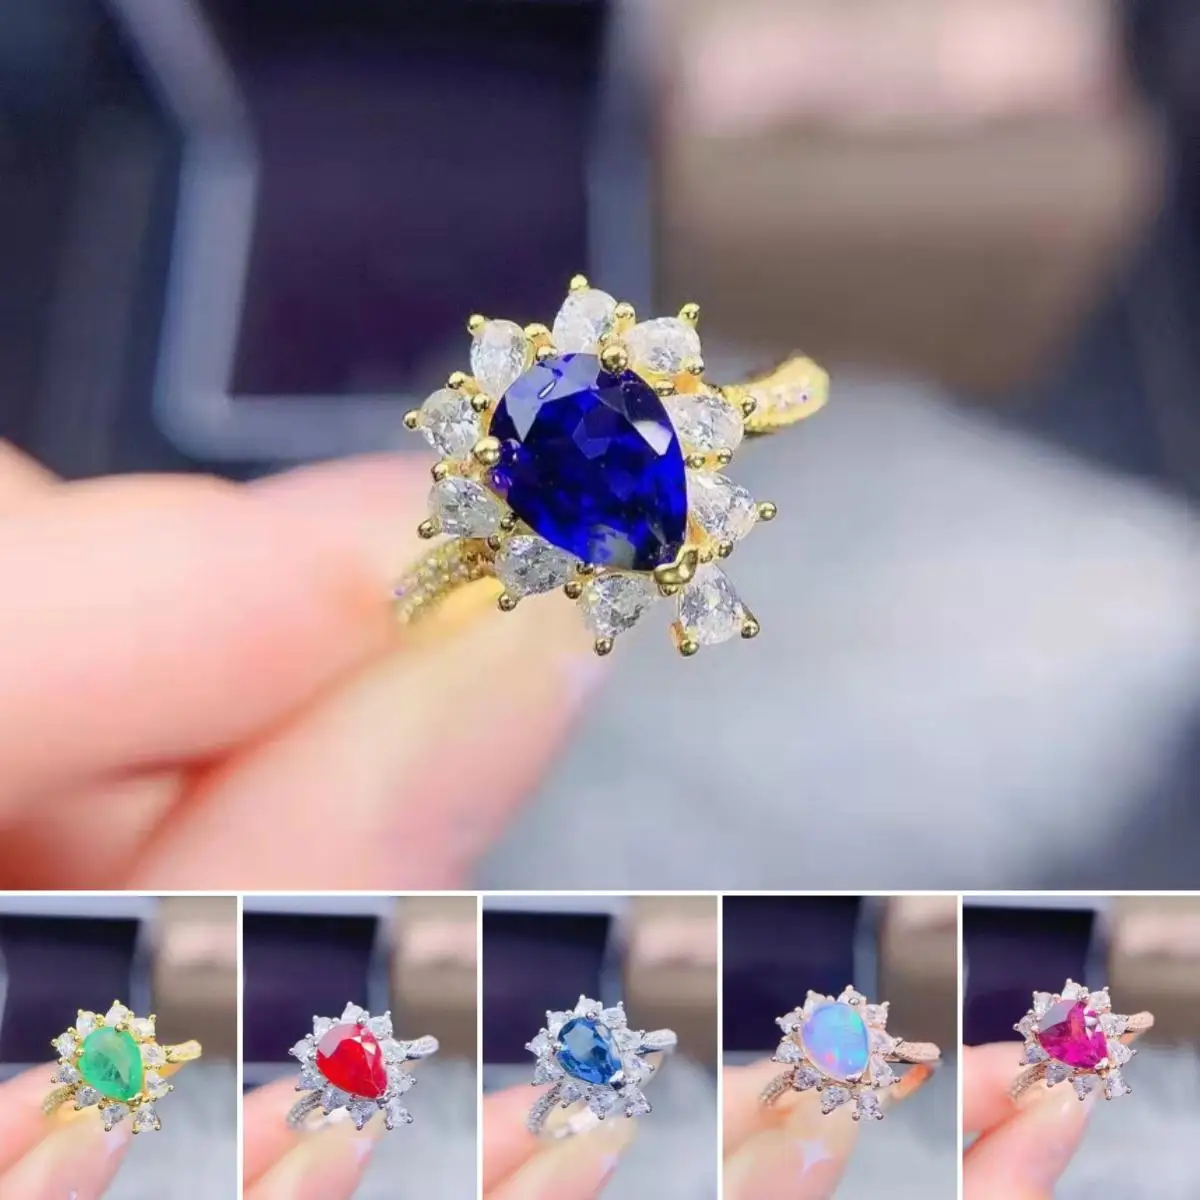 

FS S925 Sterling Silver Inlay 6*8 Natural Sapphire/Topaz Ring With Certificate Fashion Fine Wedding Women’s Jewelry MeiBaPJ